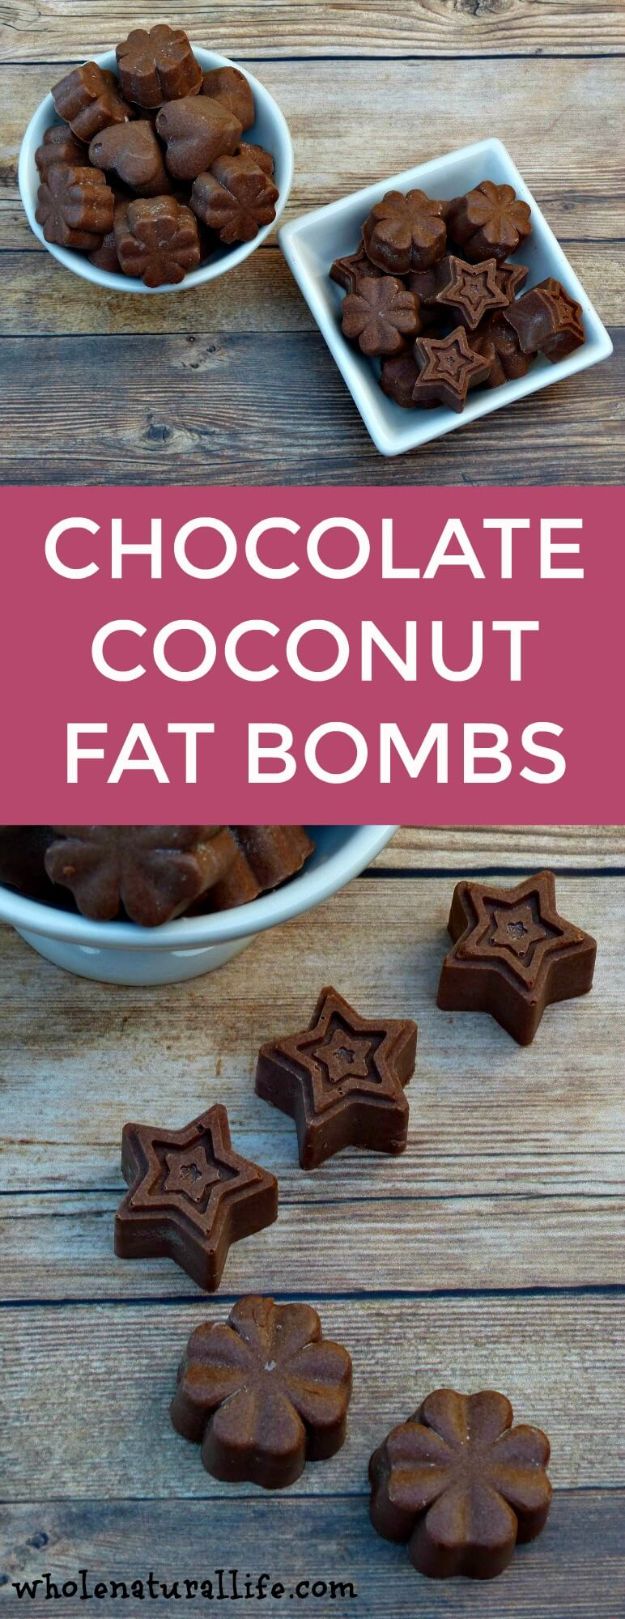 Keto Fat Bombs and Best Ketogenic Recipe Ideas to Make At Home - Chocolate Coconut Fat Bombs - Easy Recipes With Peanut Butter, Cream Cheese, Chocolate, Coconut Oil, Coffee low carb fat bombs #keto #ketorecipes